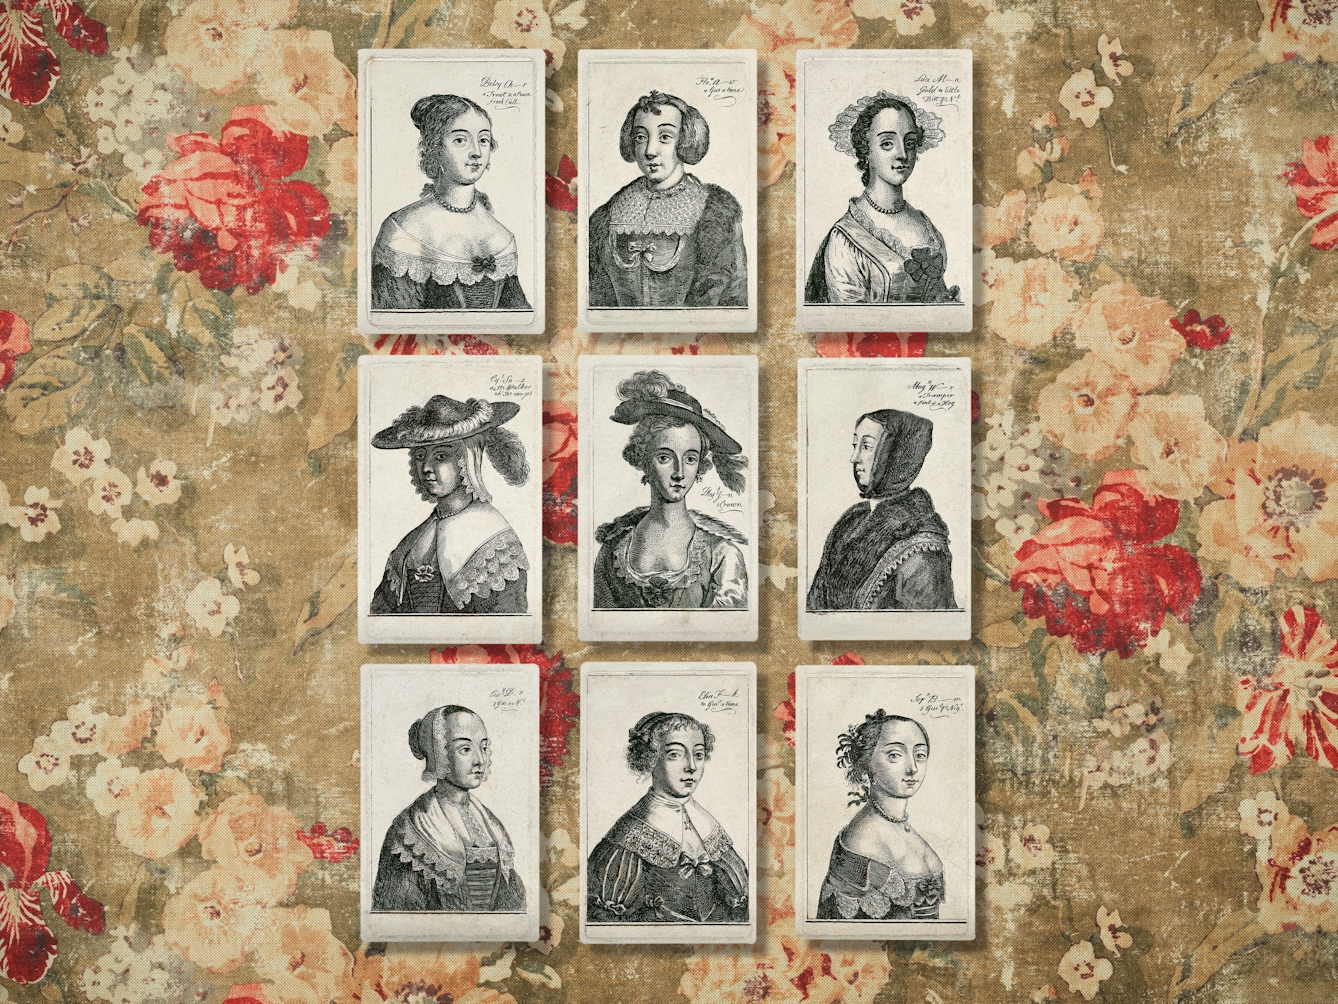 Digital composite image showing a floral renaissance worn fabric background. Resting on top of the background are 9 small etchings, each showing a portrait of a woman from the waist up. Each woman is wearing different clothes and hats from the 19th century. 	